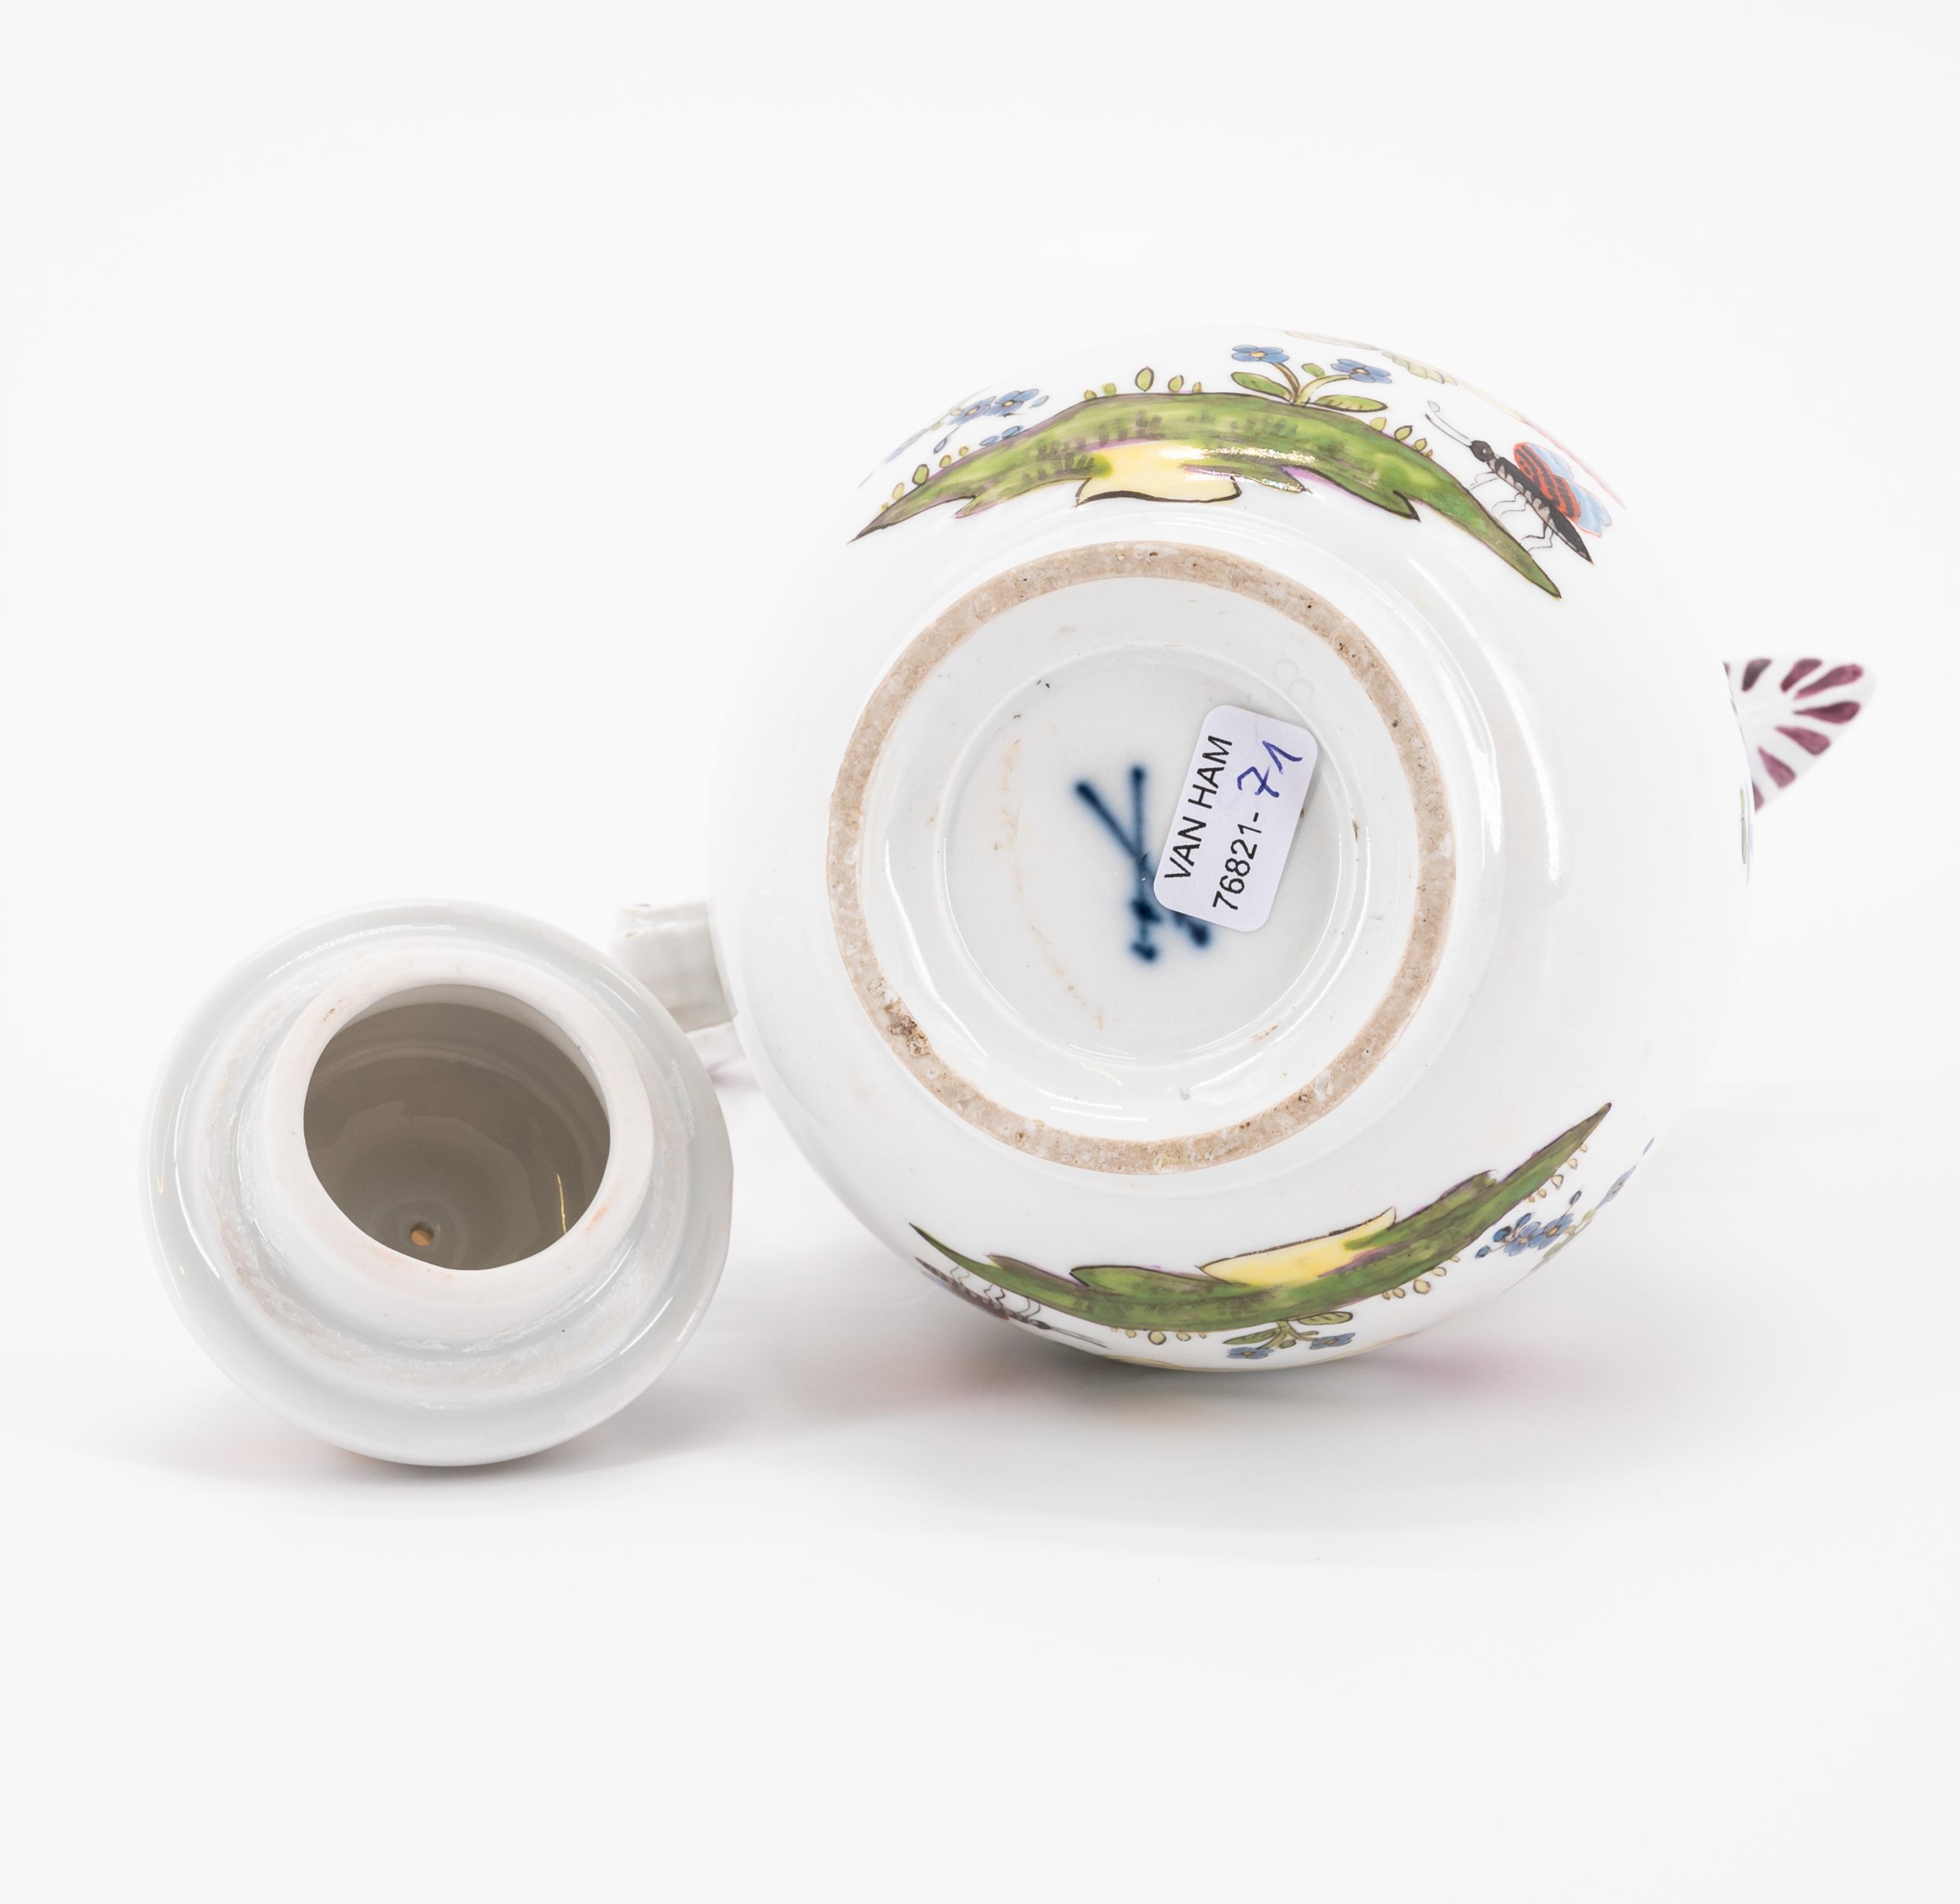 PORCELAIN COFFEE POT, CUP AND SAUCER WITH BUTTERFLY DECOR - Image 11 of 11